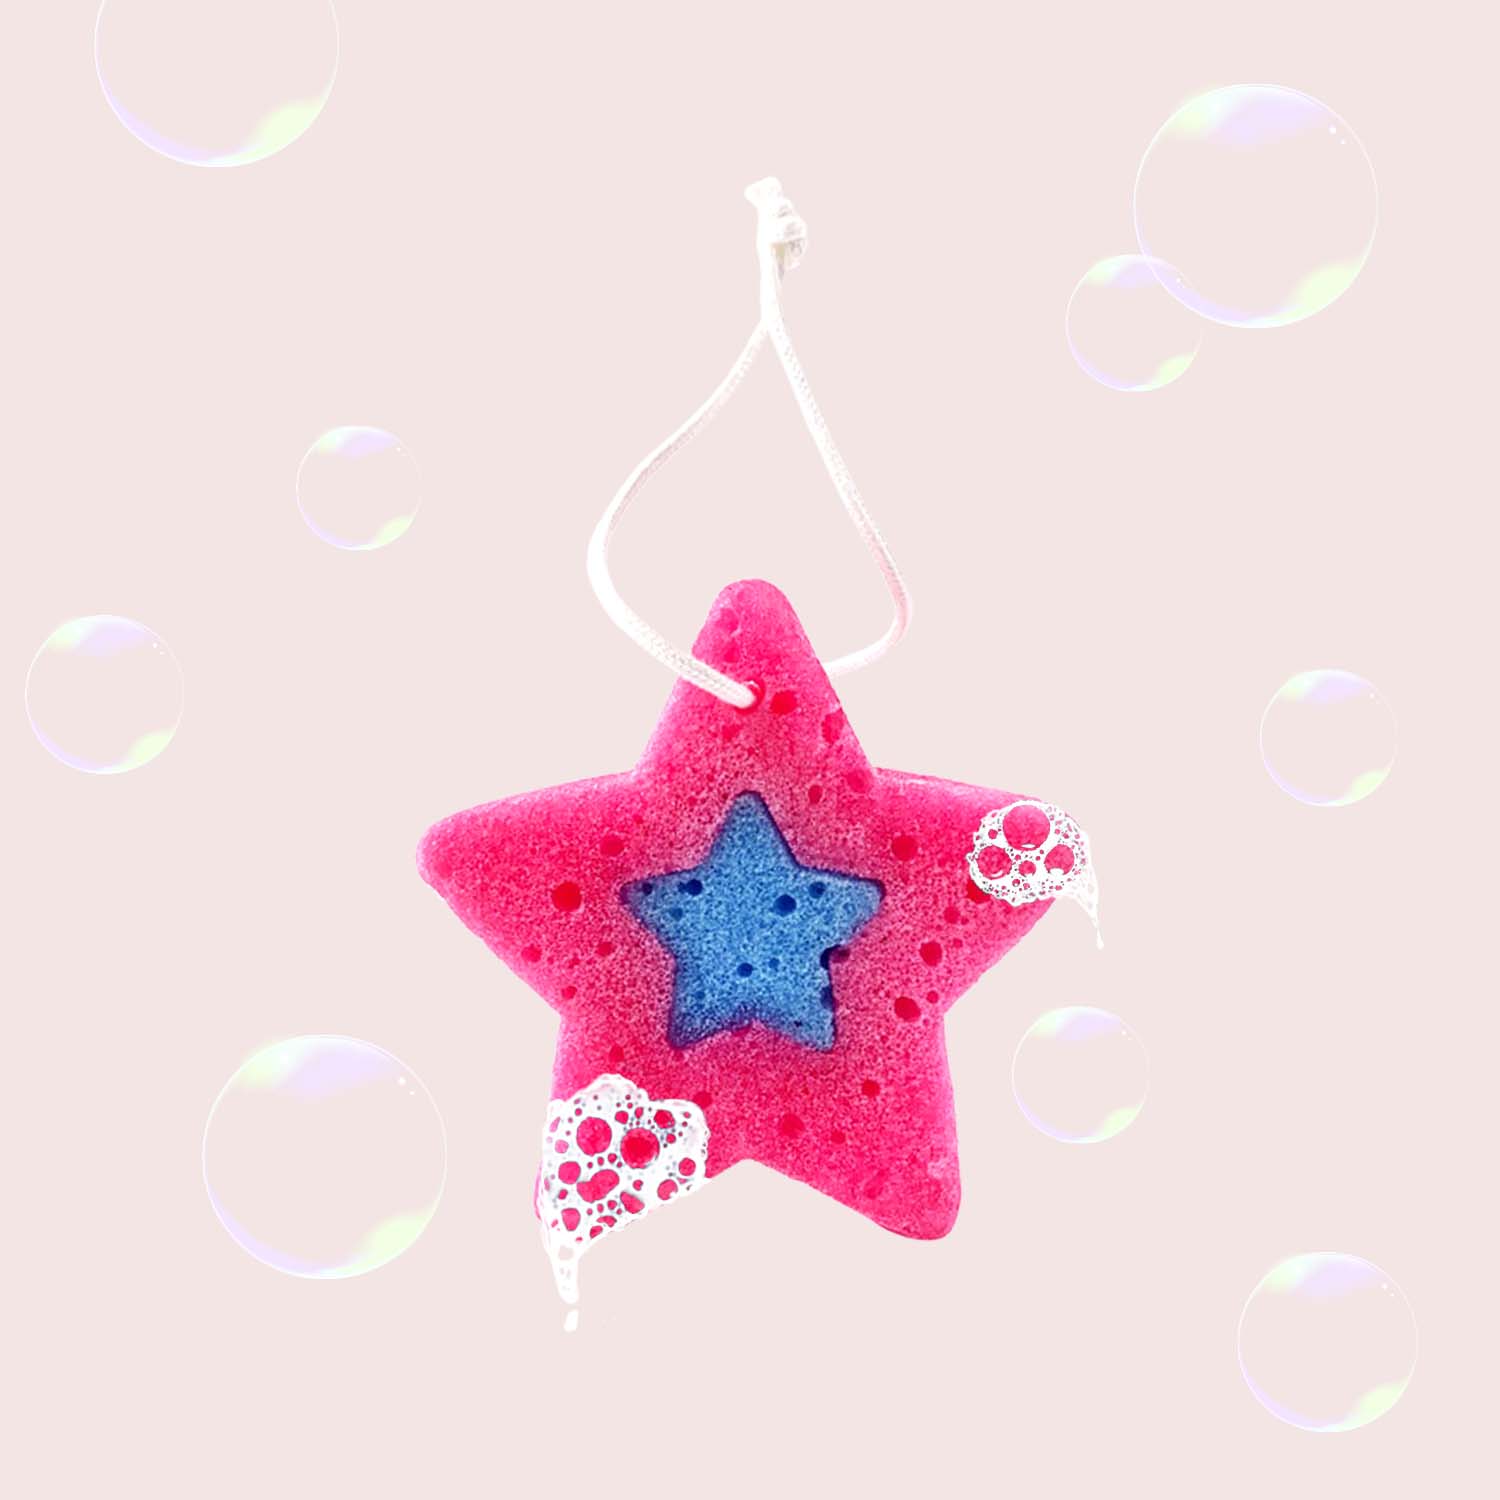 Superstar Soap Sponge (Peaches And Dreams)